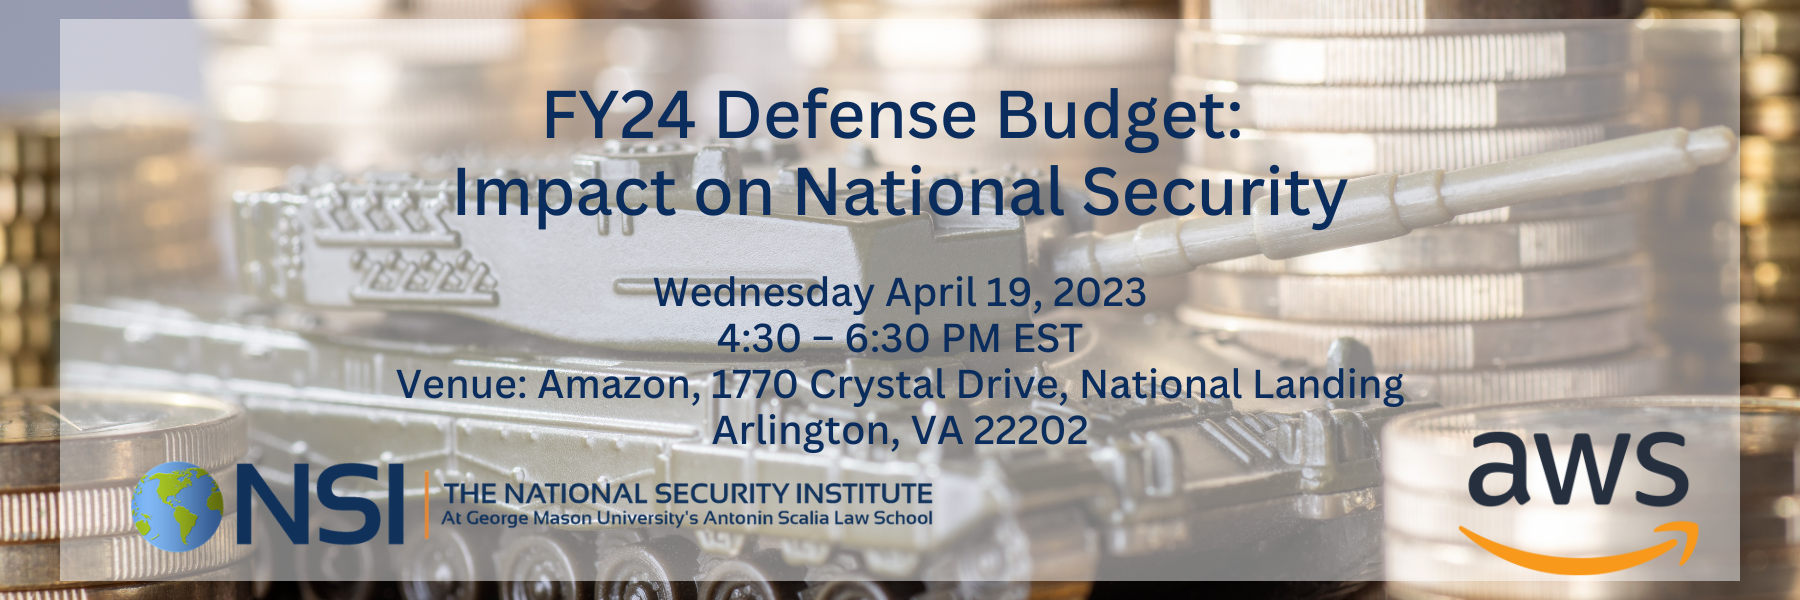 FY24 Defense Budget: Impact on National Security